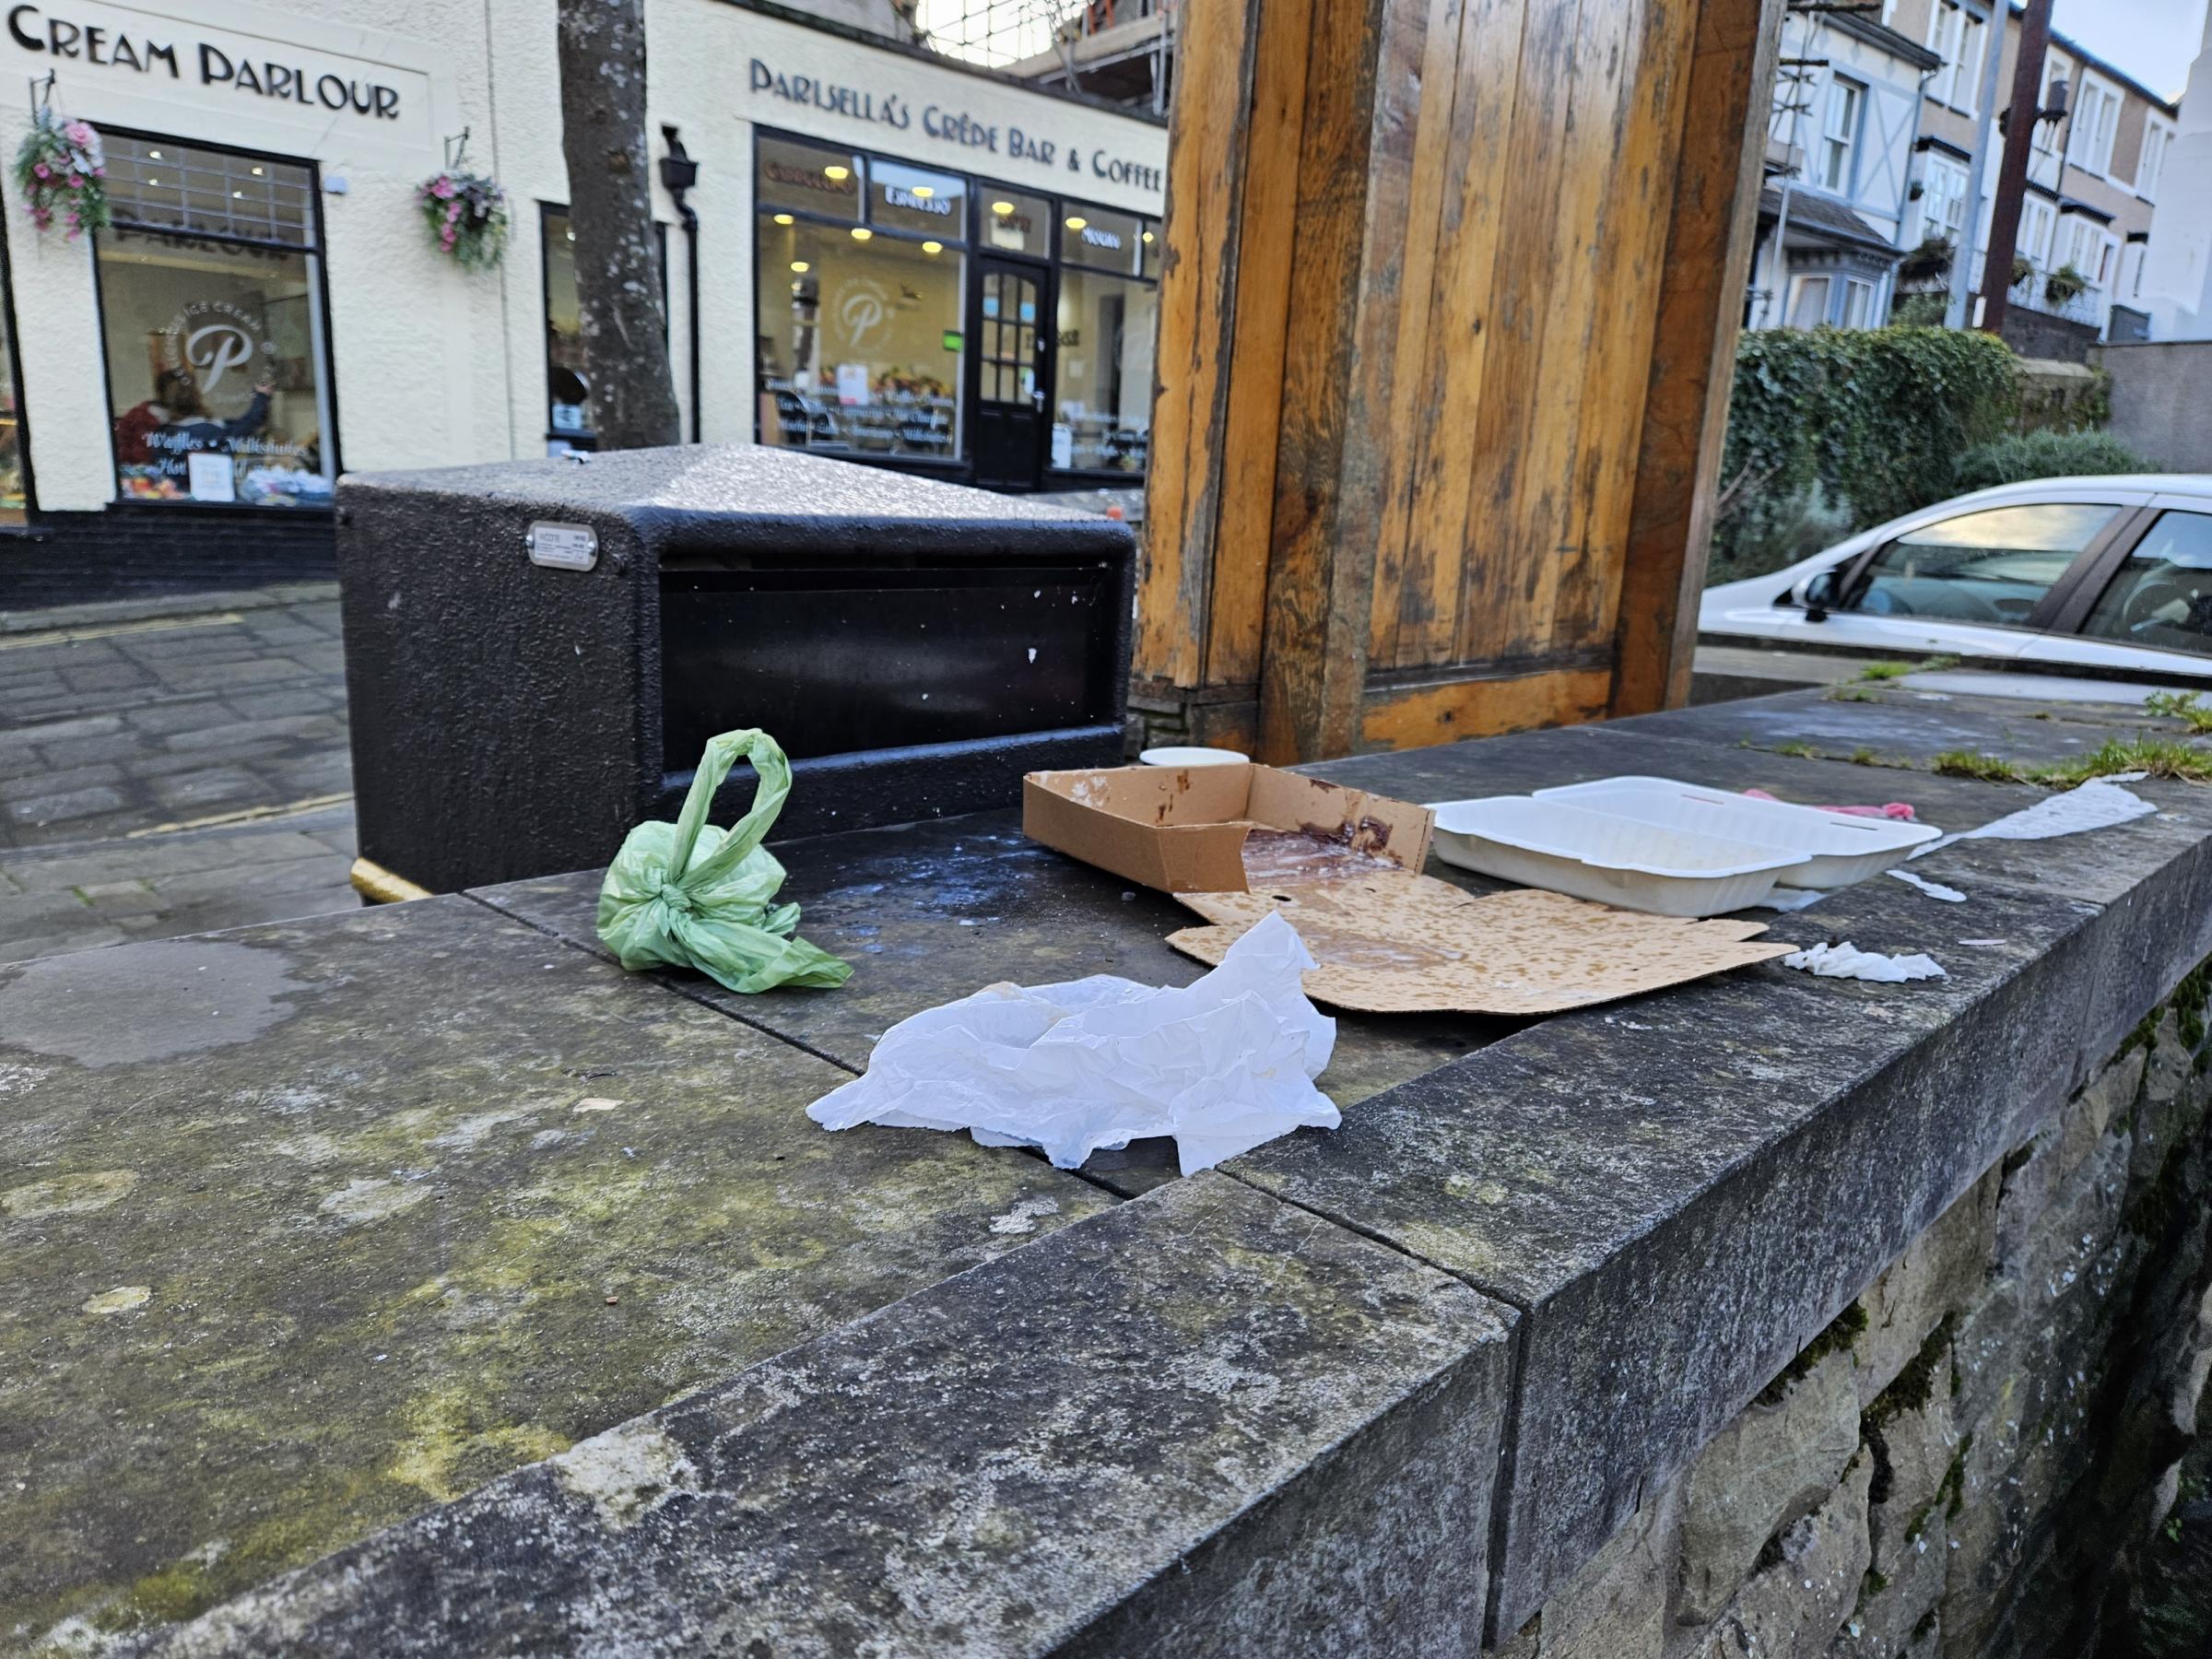 Unemptied and overfilled bins meant Conwy’s High Street pavements were strewn with chip shop cartons, ice cream containers, and pizza boxes during the busy Easter holidays..